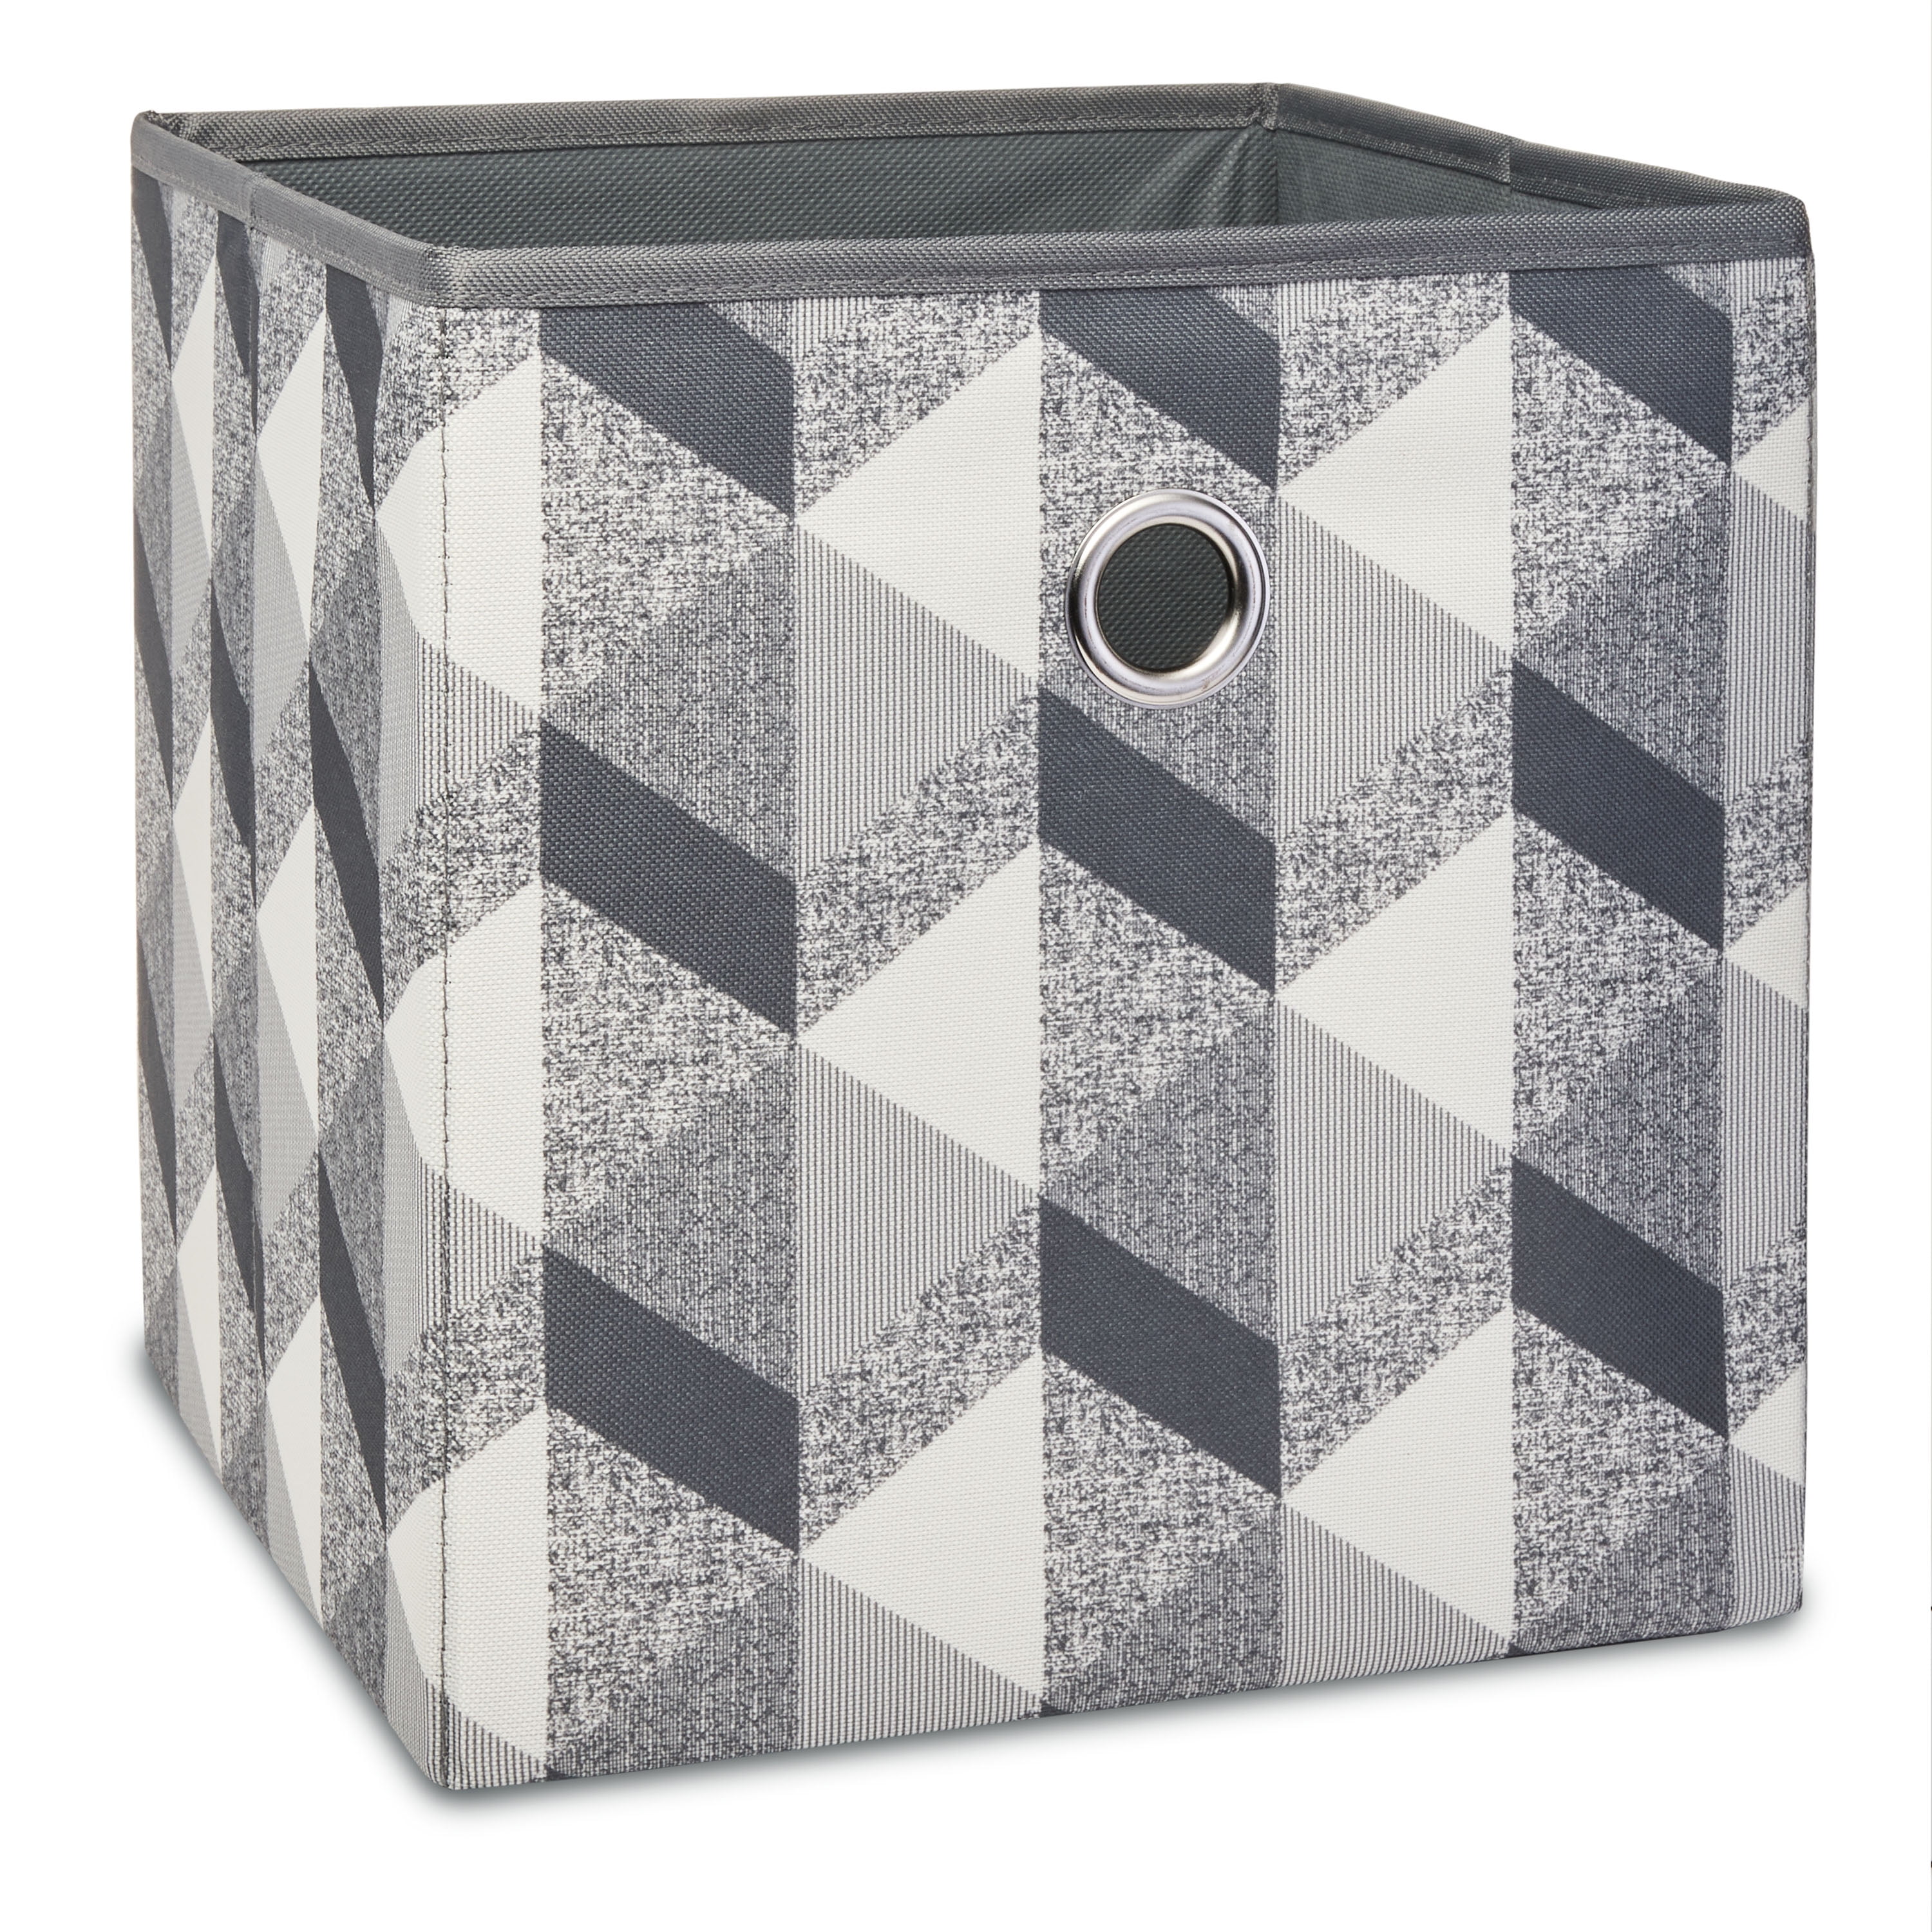 Mainstays Collapsible Fabric Cube Storage Bins (10.5" x 10.5"), 3D Gray Geo